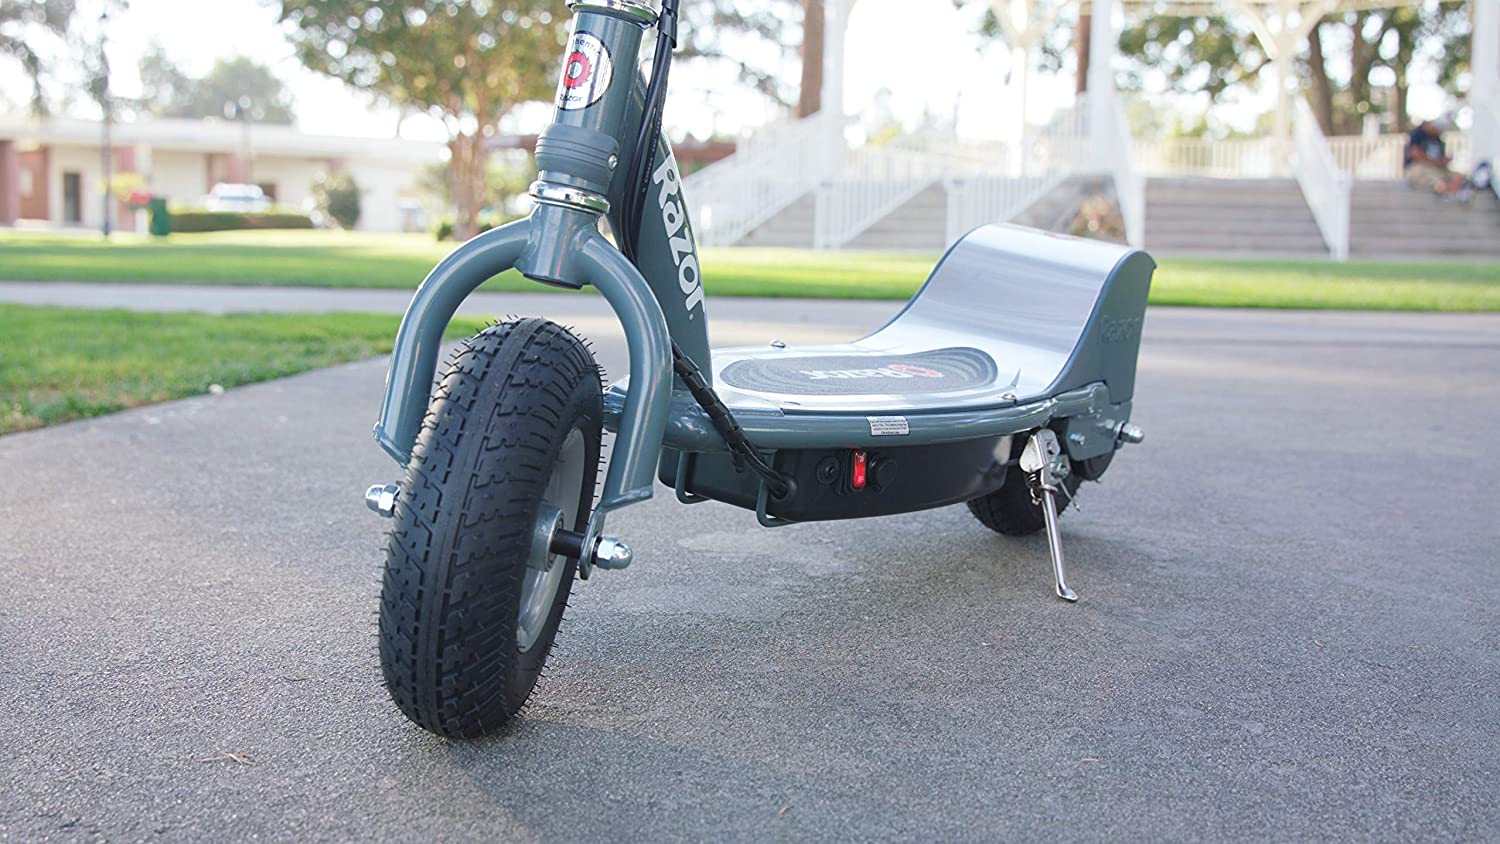 Razor E300 Up to 10 Mile Range 15 MPH 9" Tires Electric Scooter Gray New